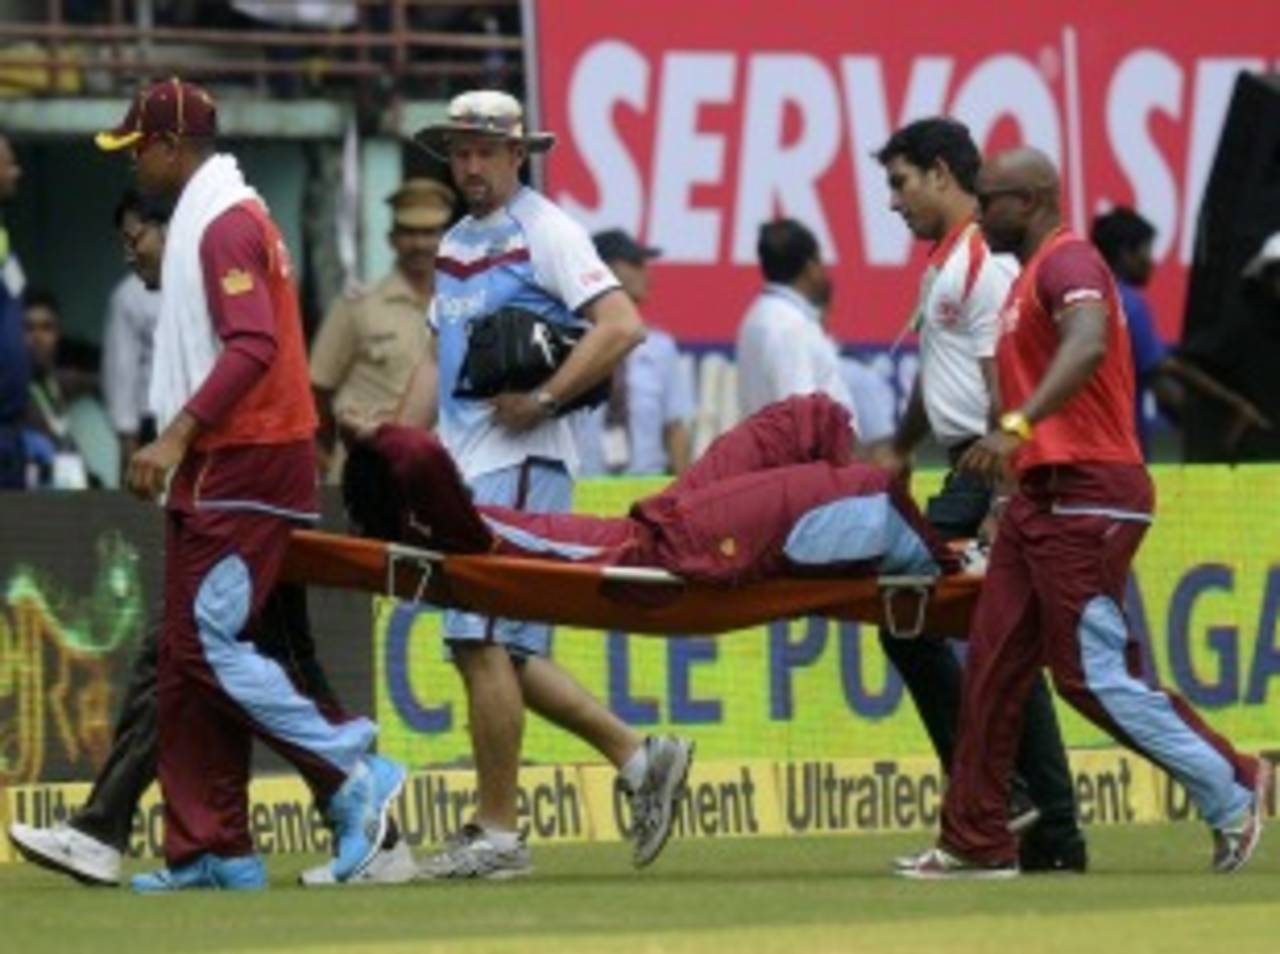 Chris Gayle was taken off the field on a stretcher, India v West Indies, 1st ODI, Kochi, November 21, 2013